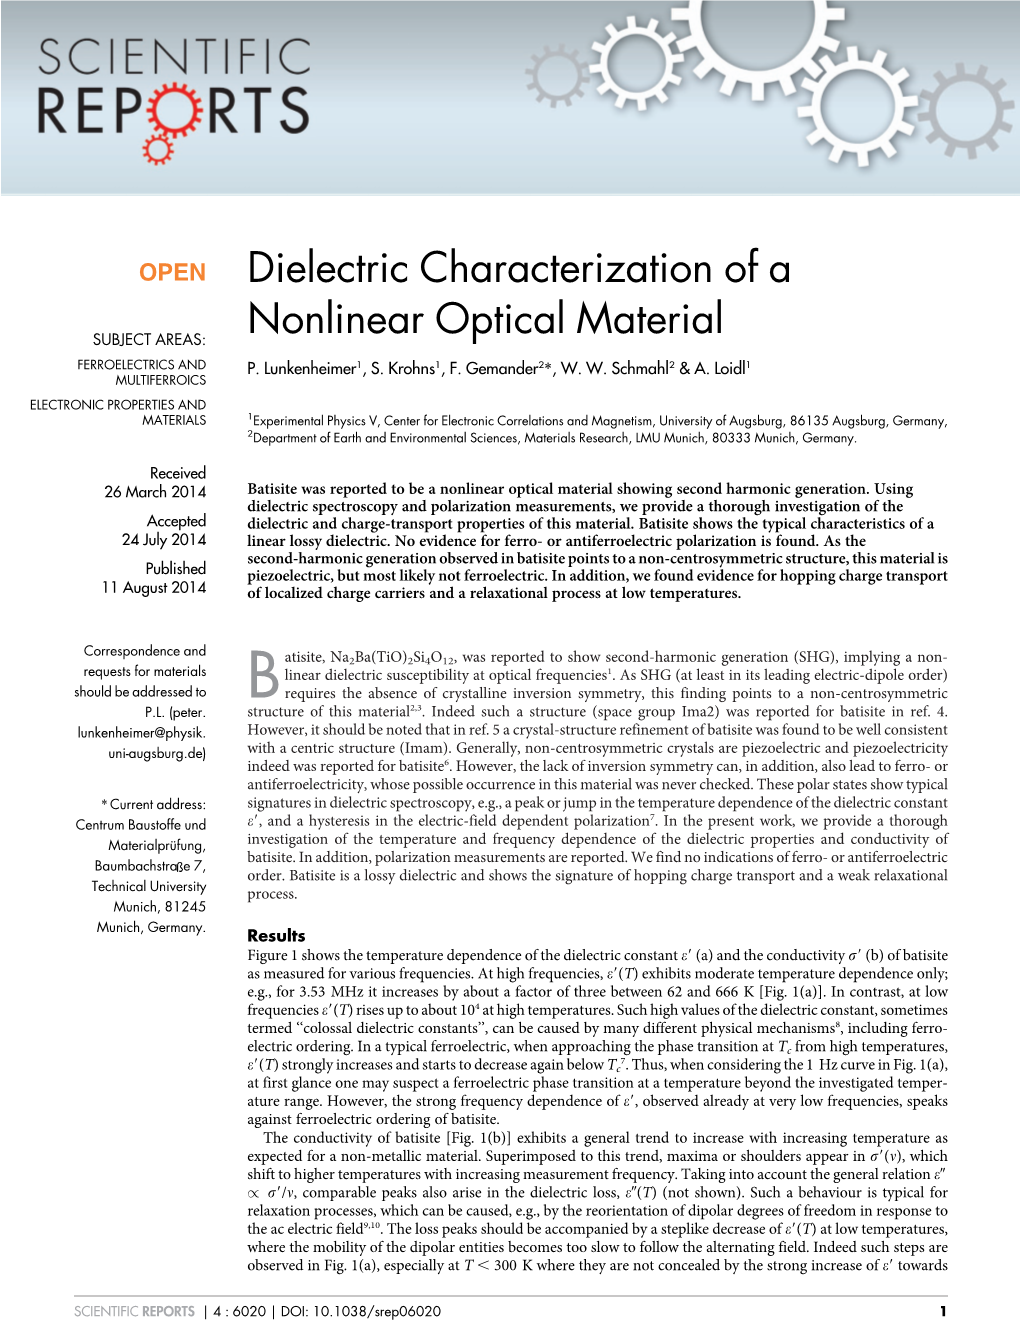 Dielectric Characterization of a Nonlinear Optical Material